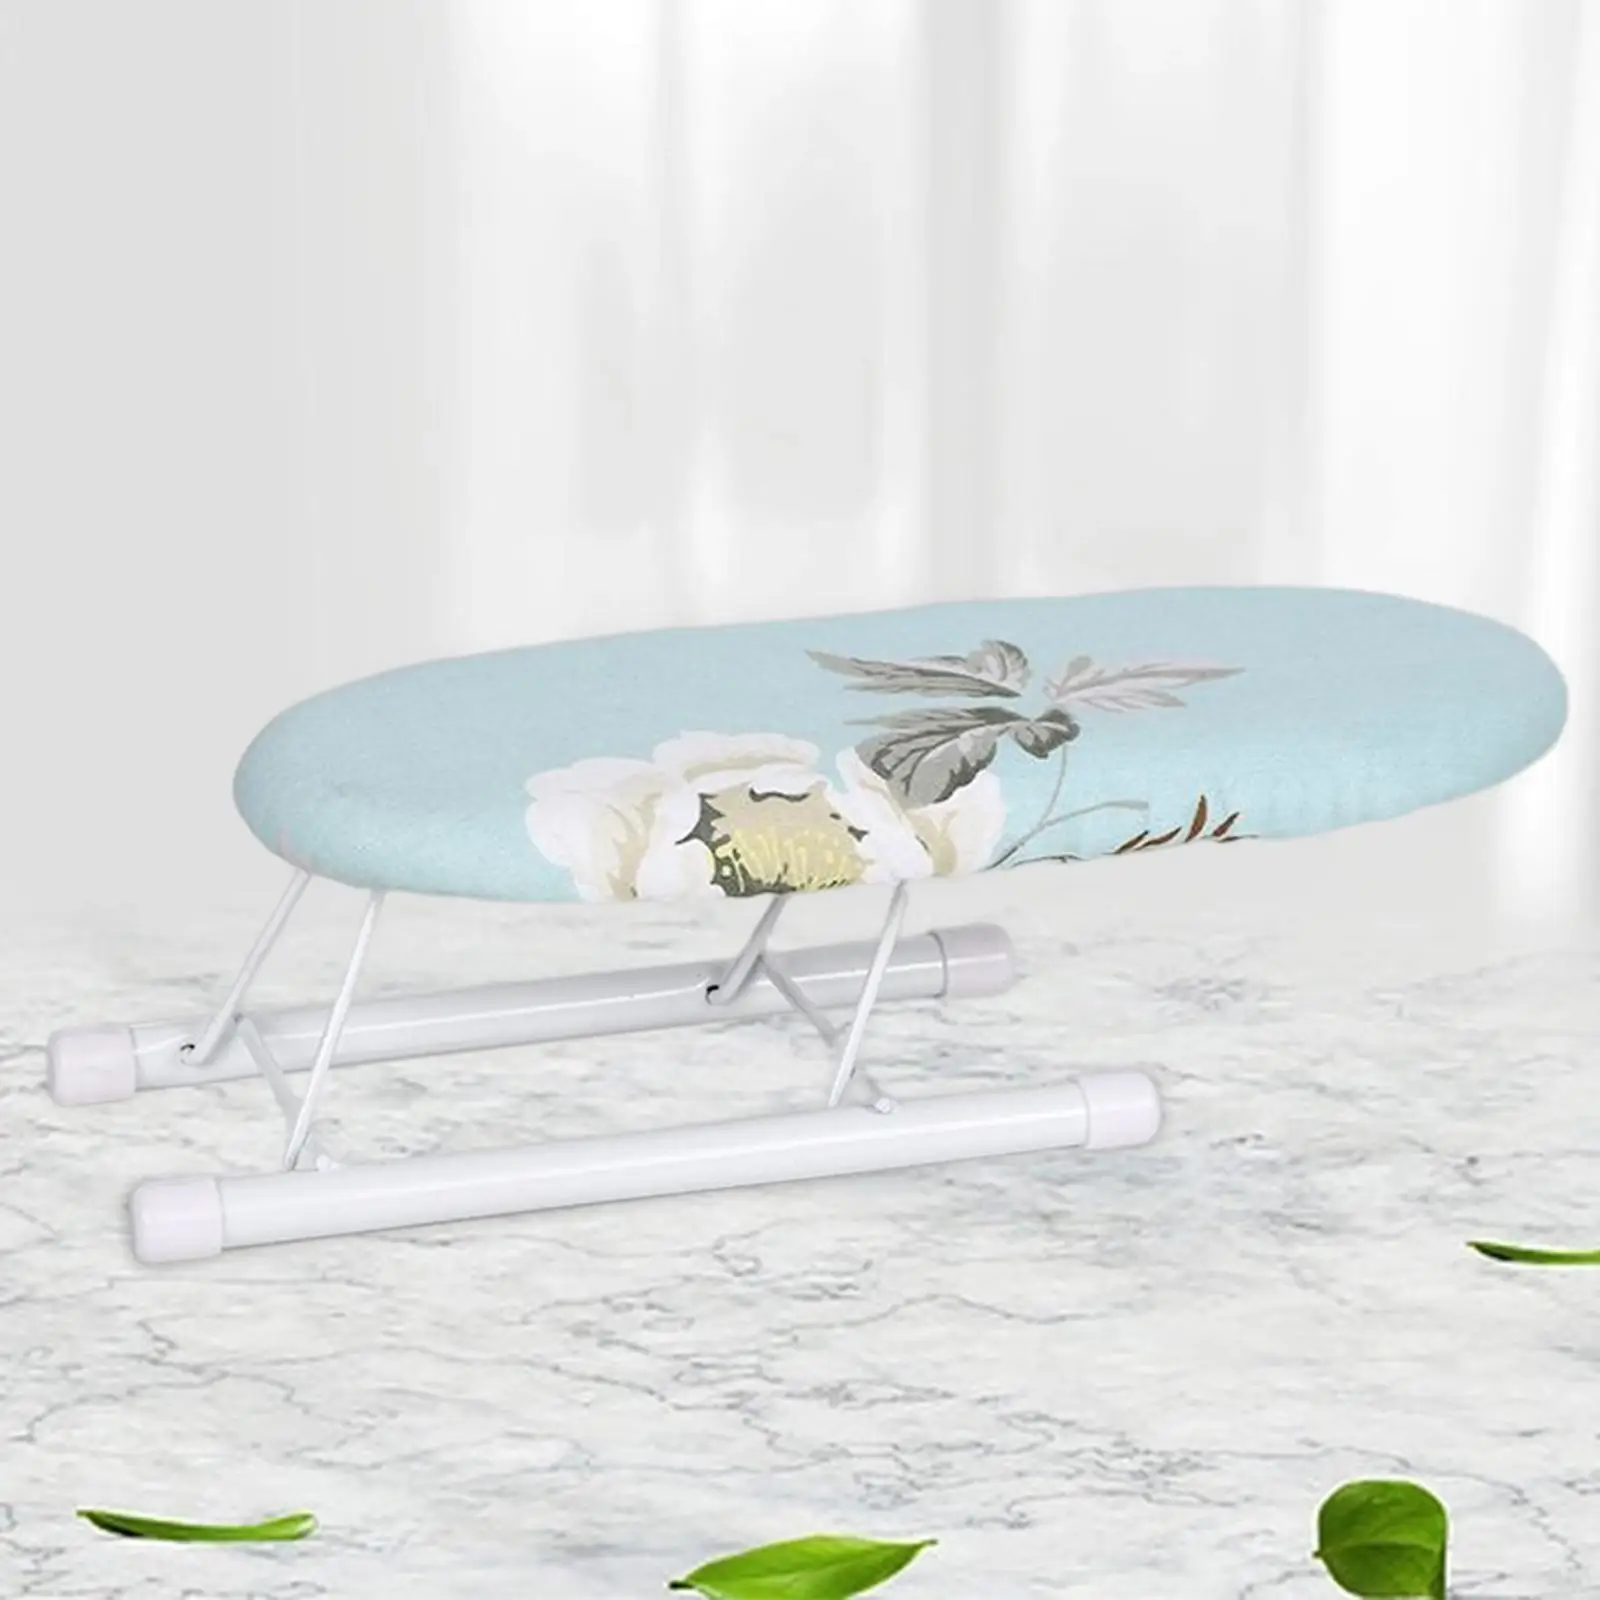 Desktop Ironing Board Compact and Lightweight Foldable Design with Heat